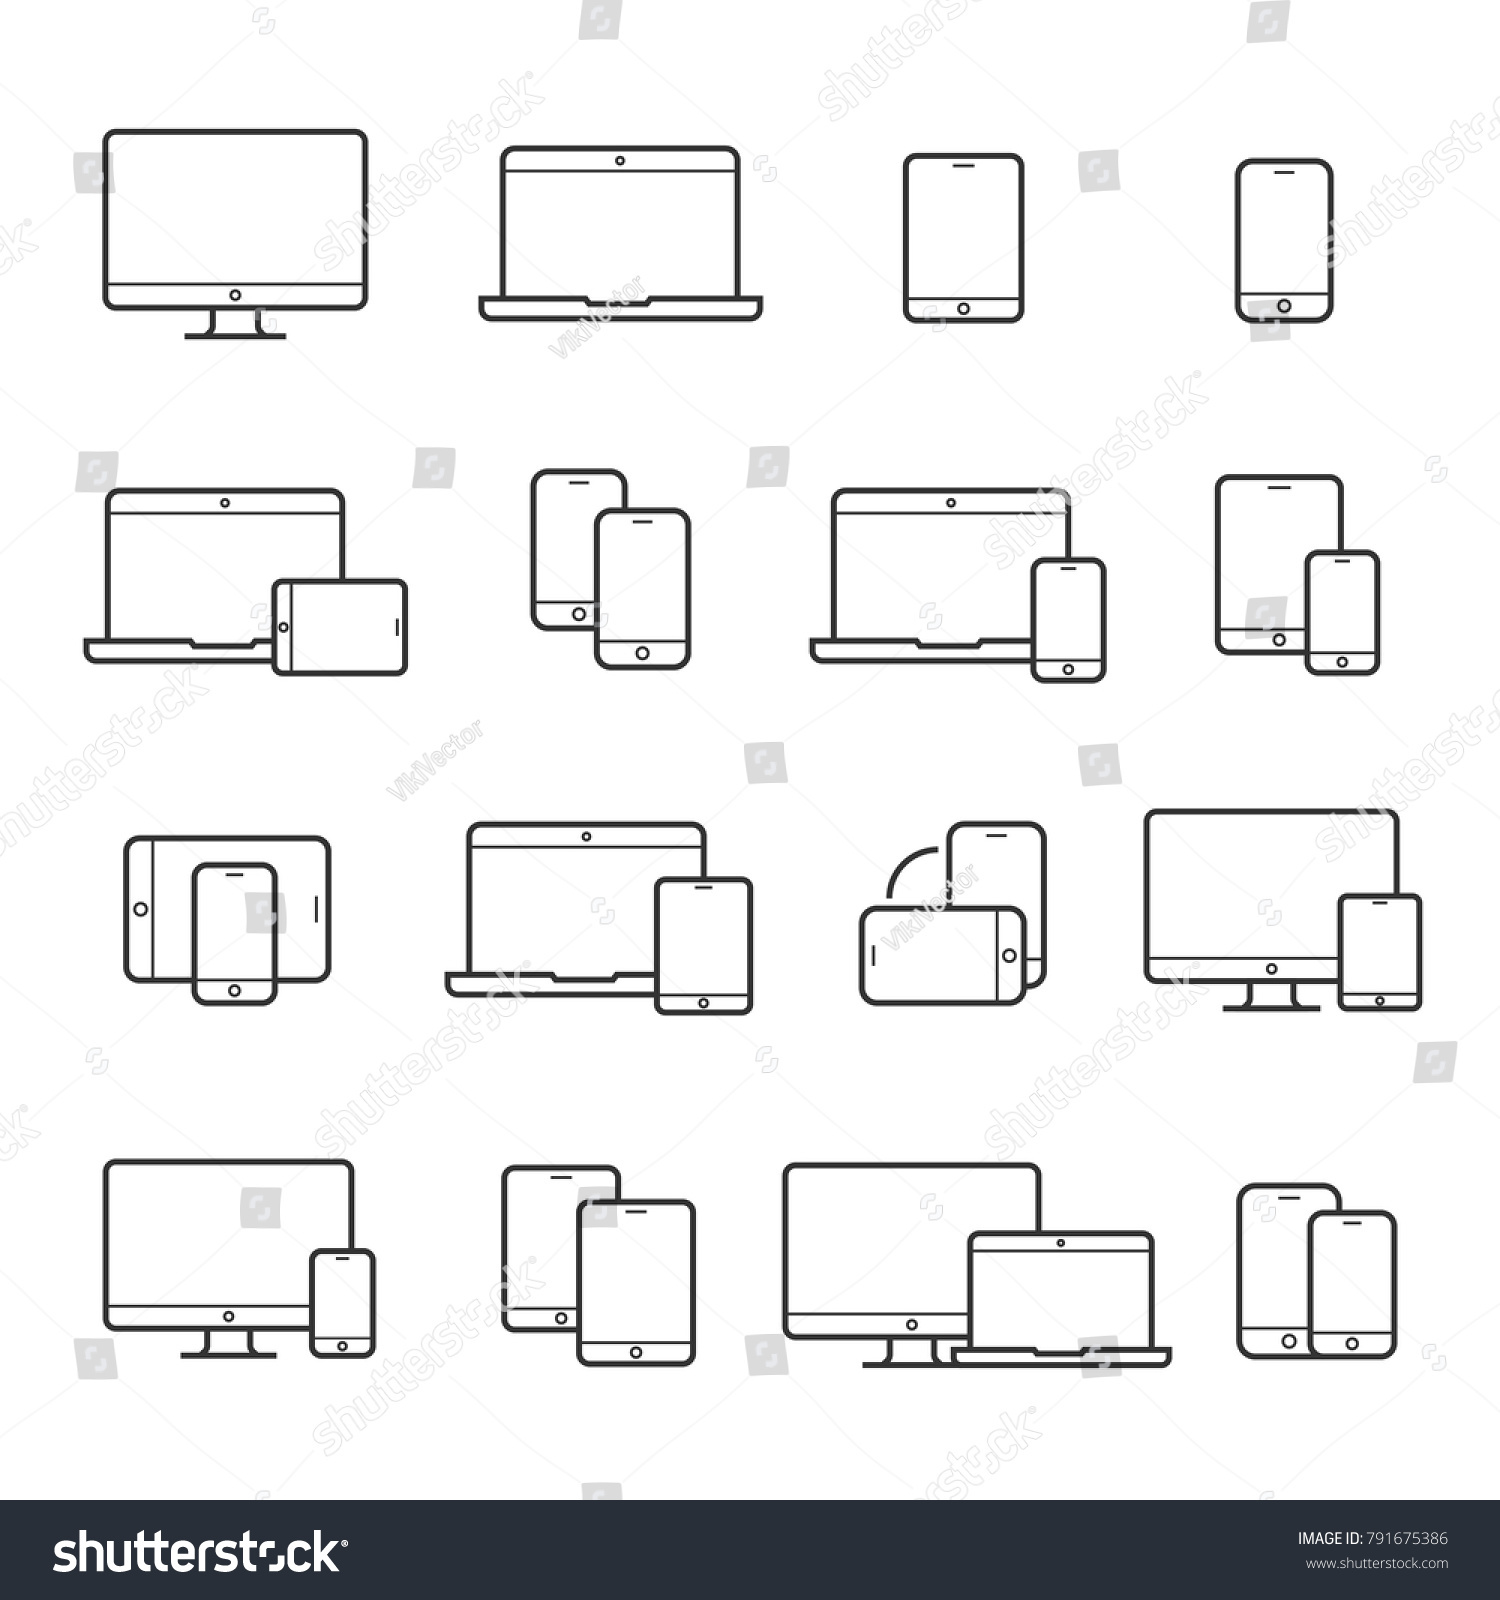 Device line icon set. Portable compact personal computer, smartphone, mobile phone, gadgets for information management, mobile calls, email sending. Vector line art illustration, white background